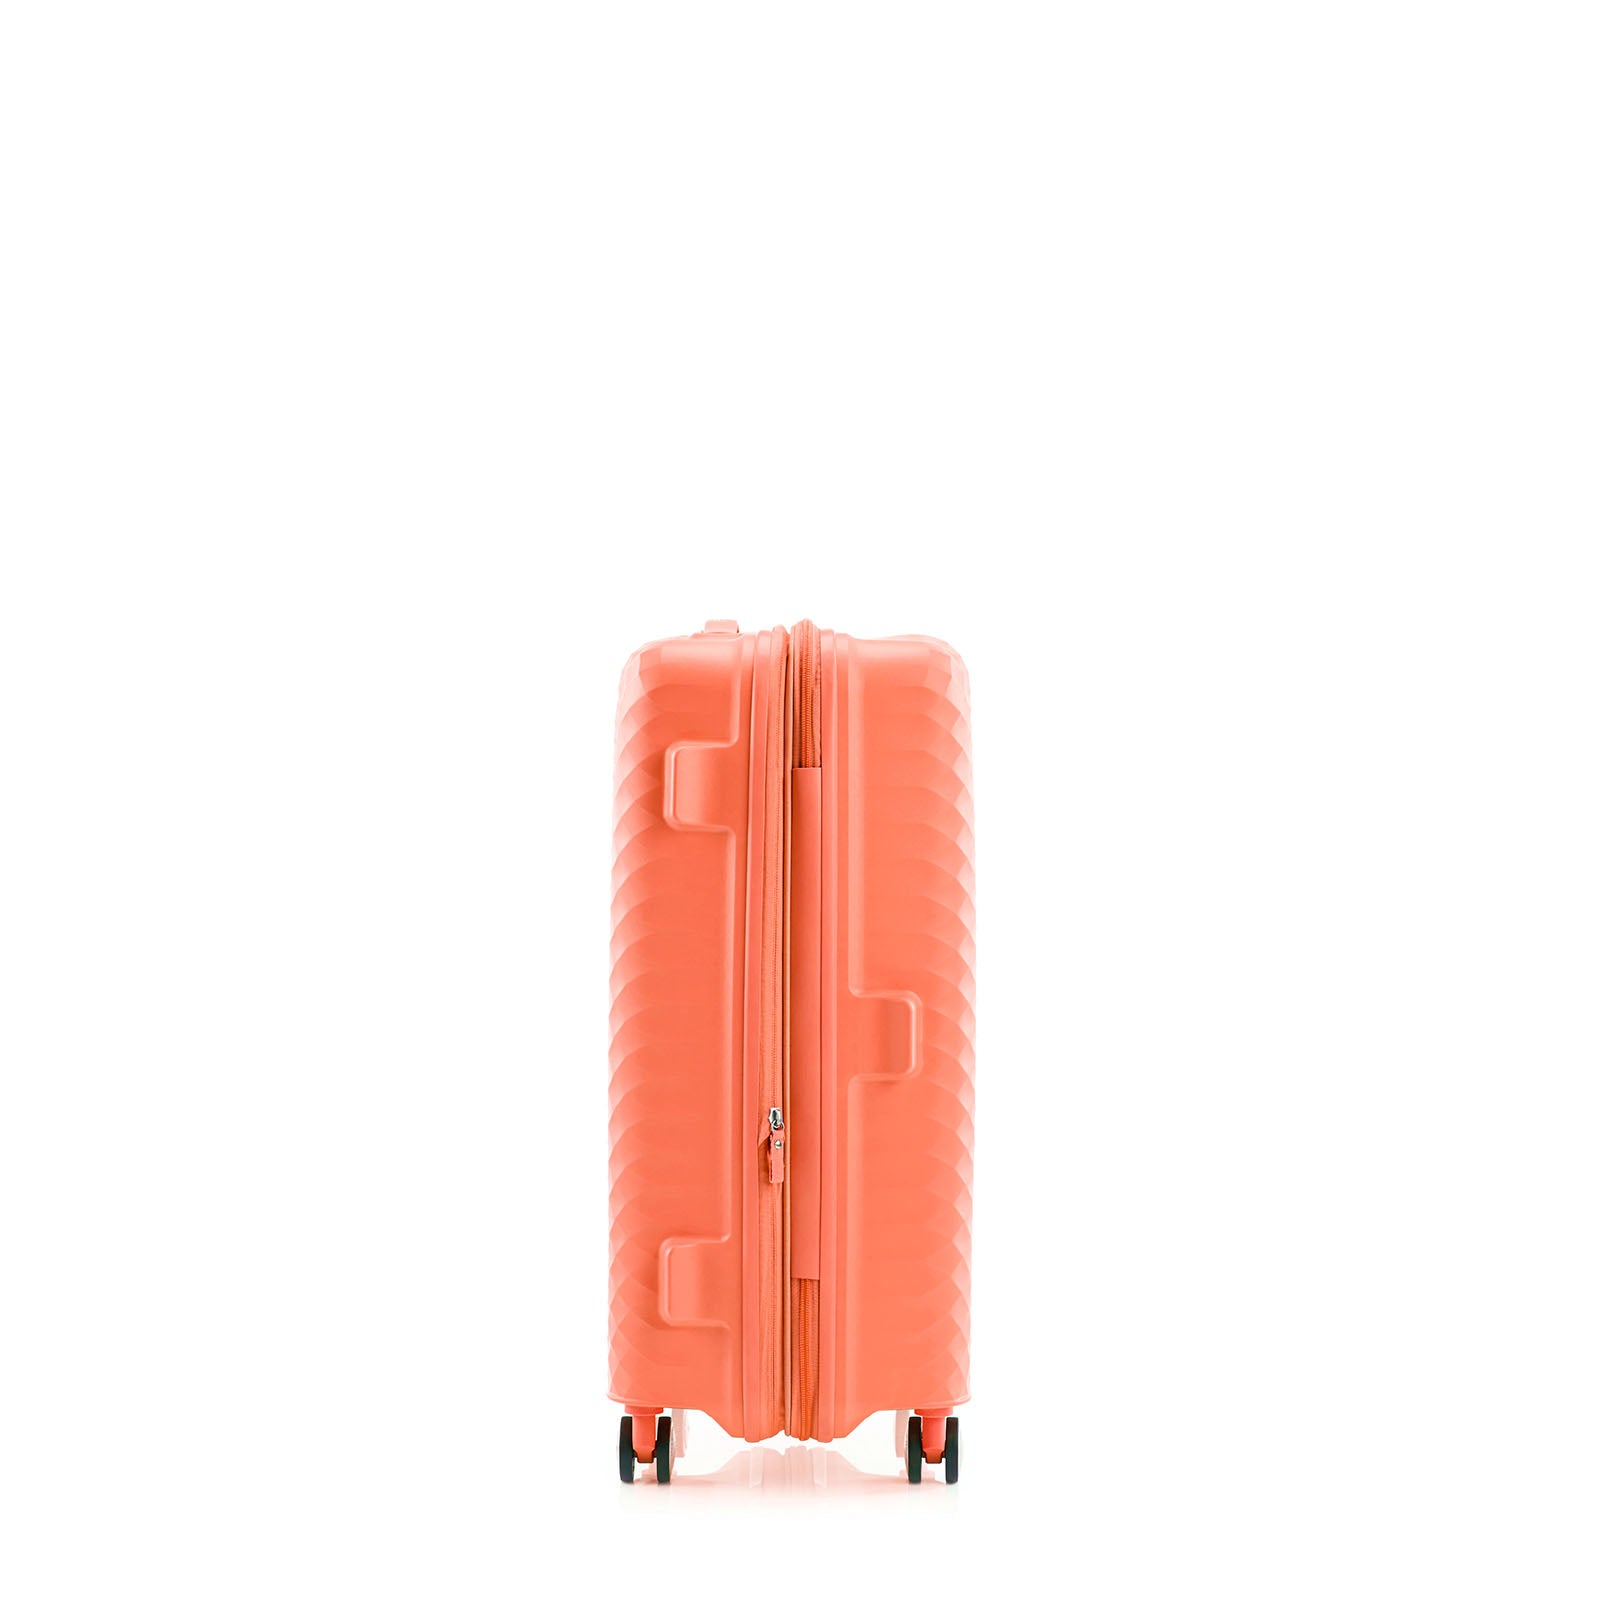 American-Tourister-Squasem-66cm-Suitcase-Bright-Coral-Side